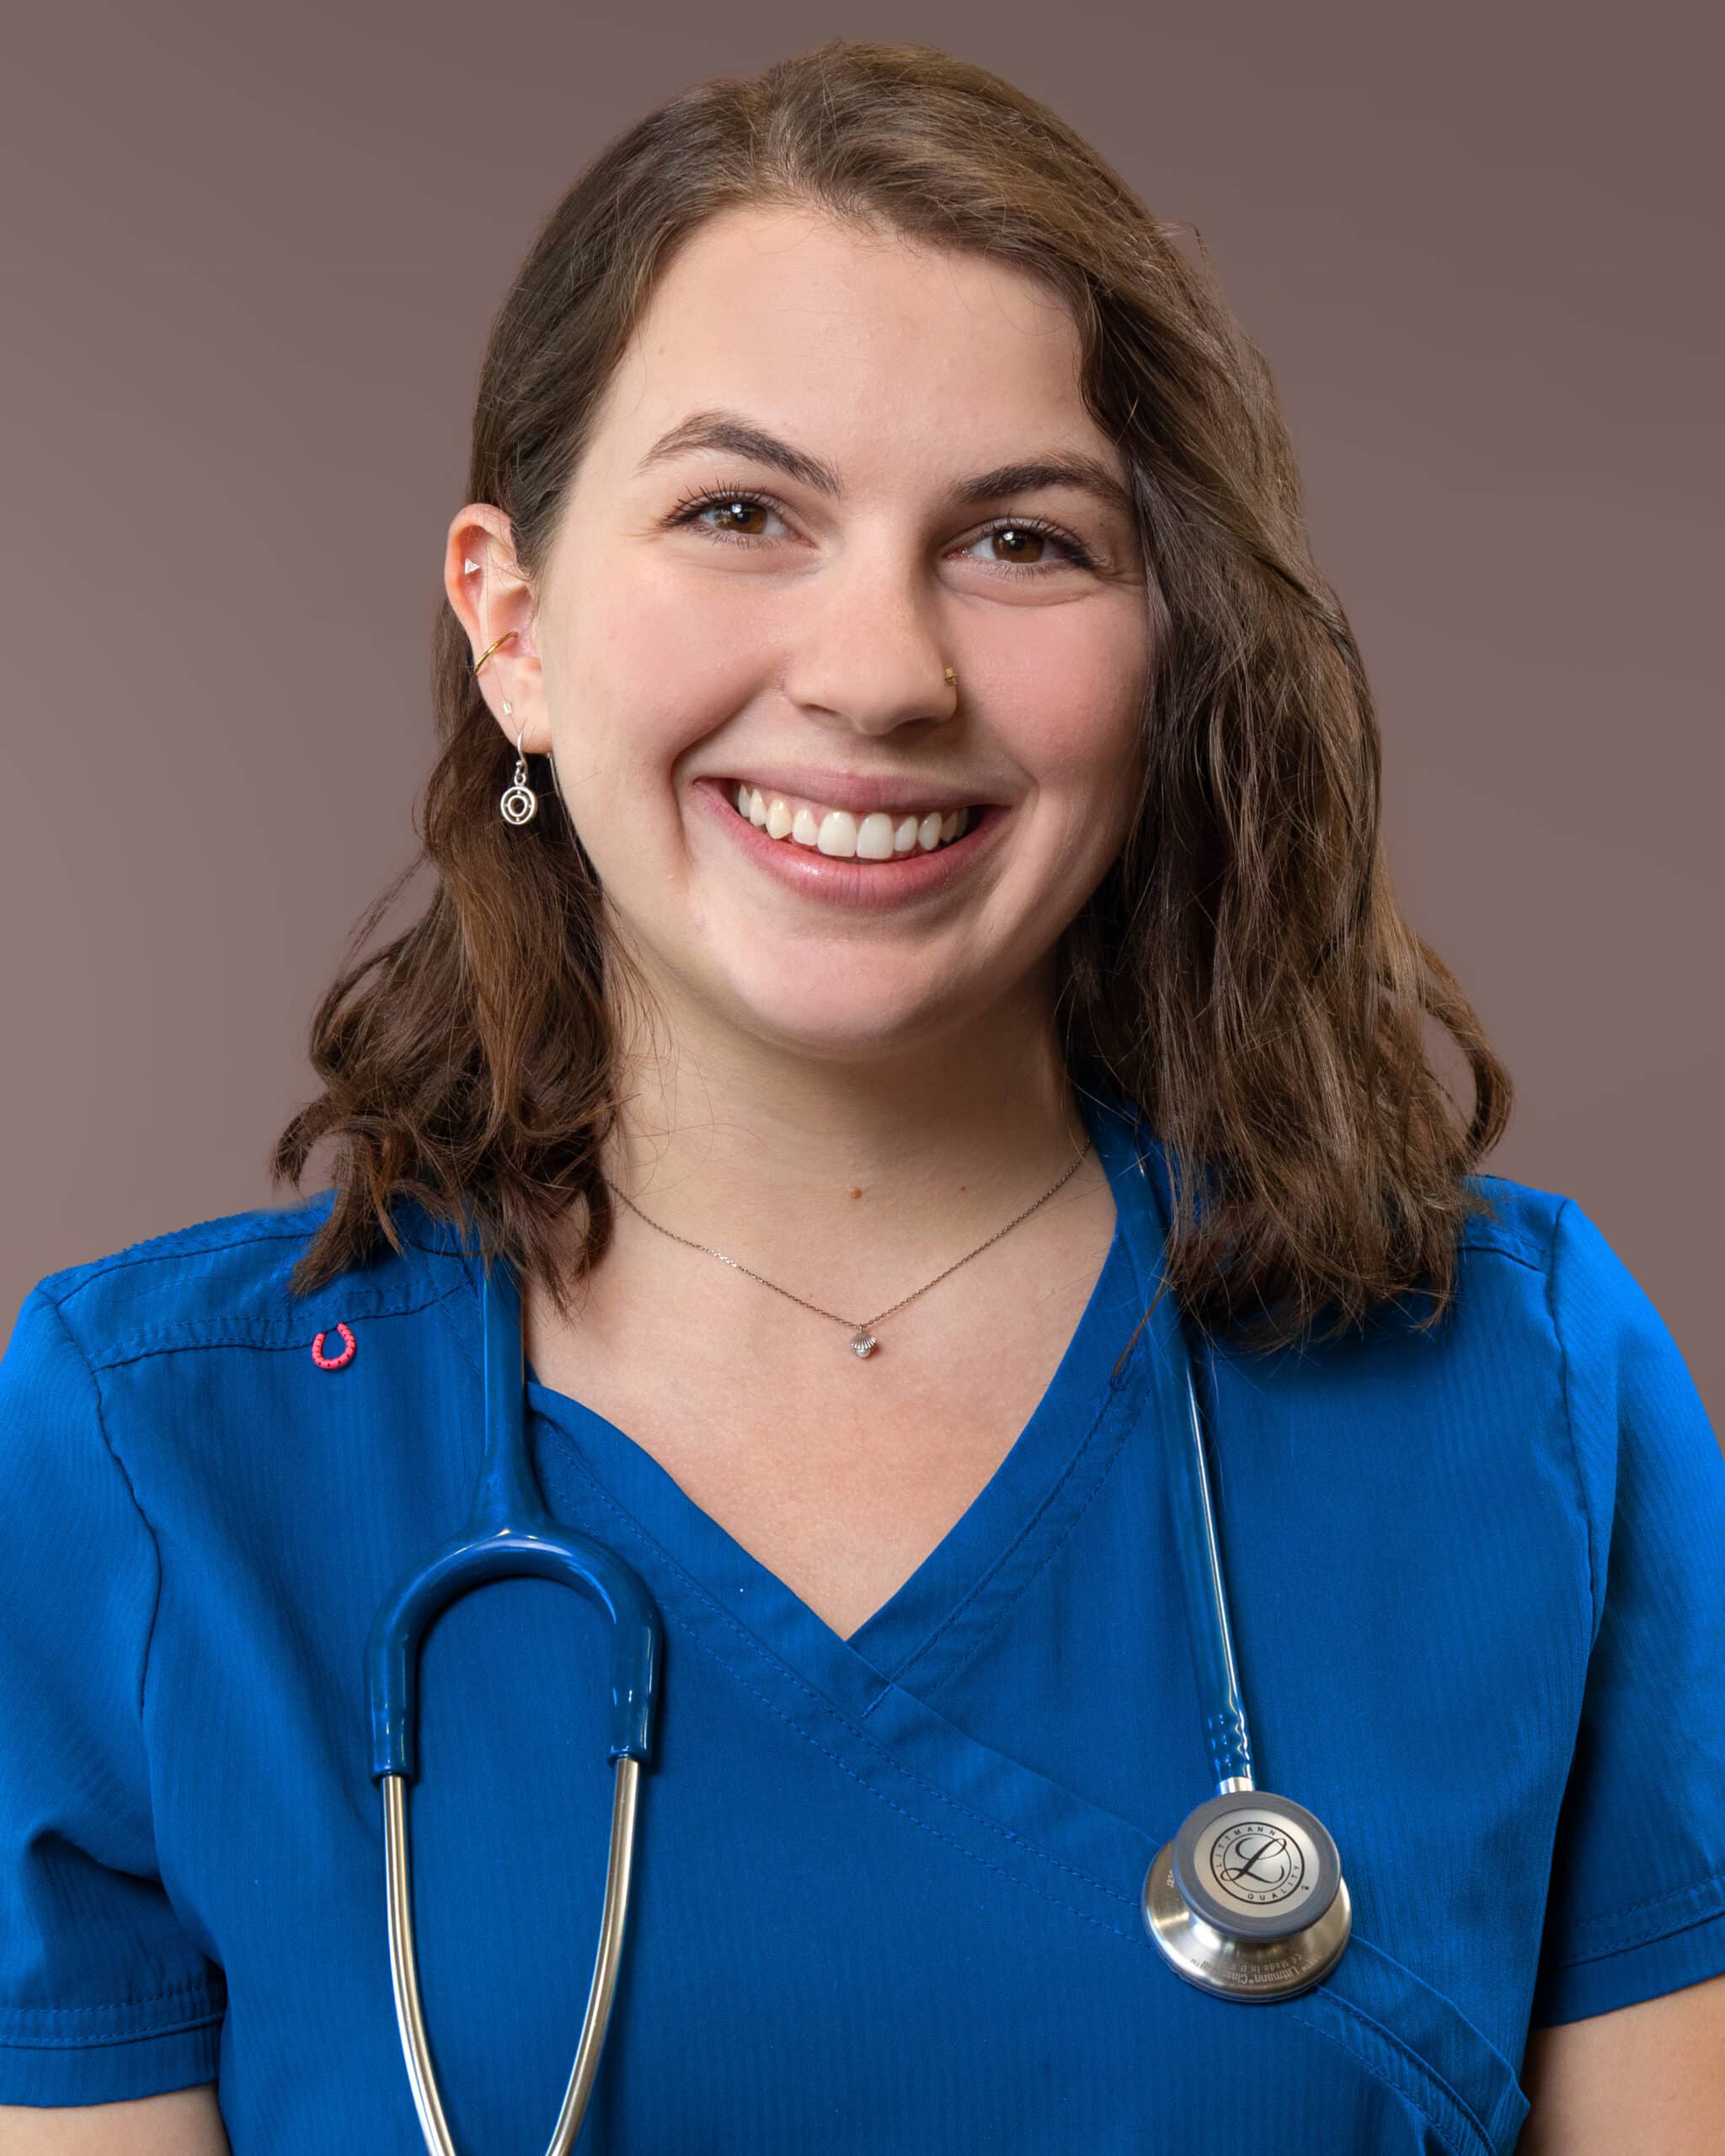 A nurse in blue scrubs with a stethoscope